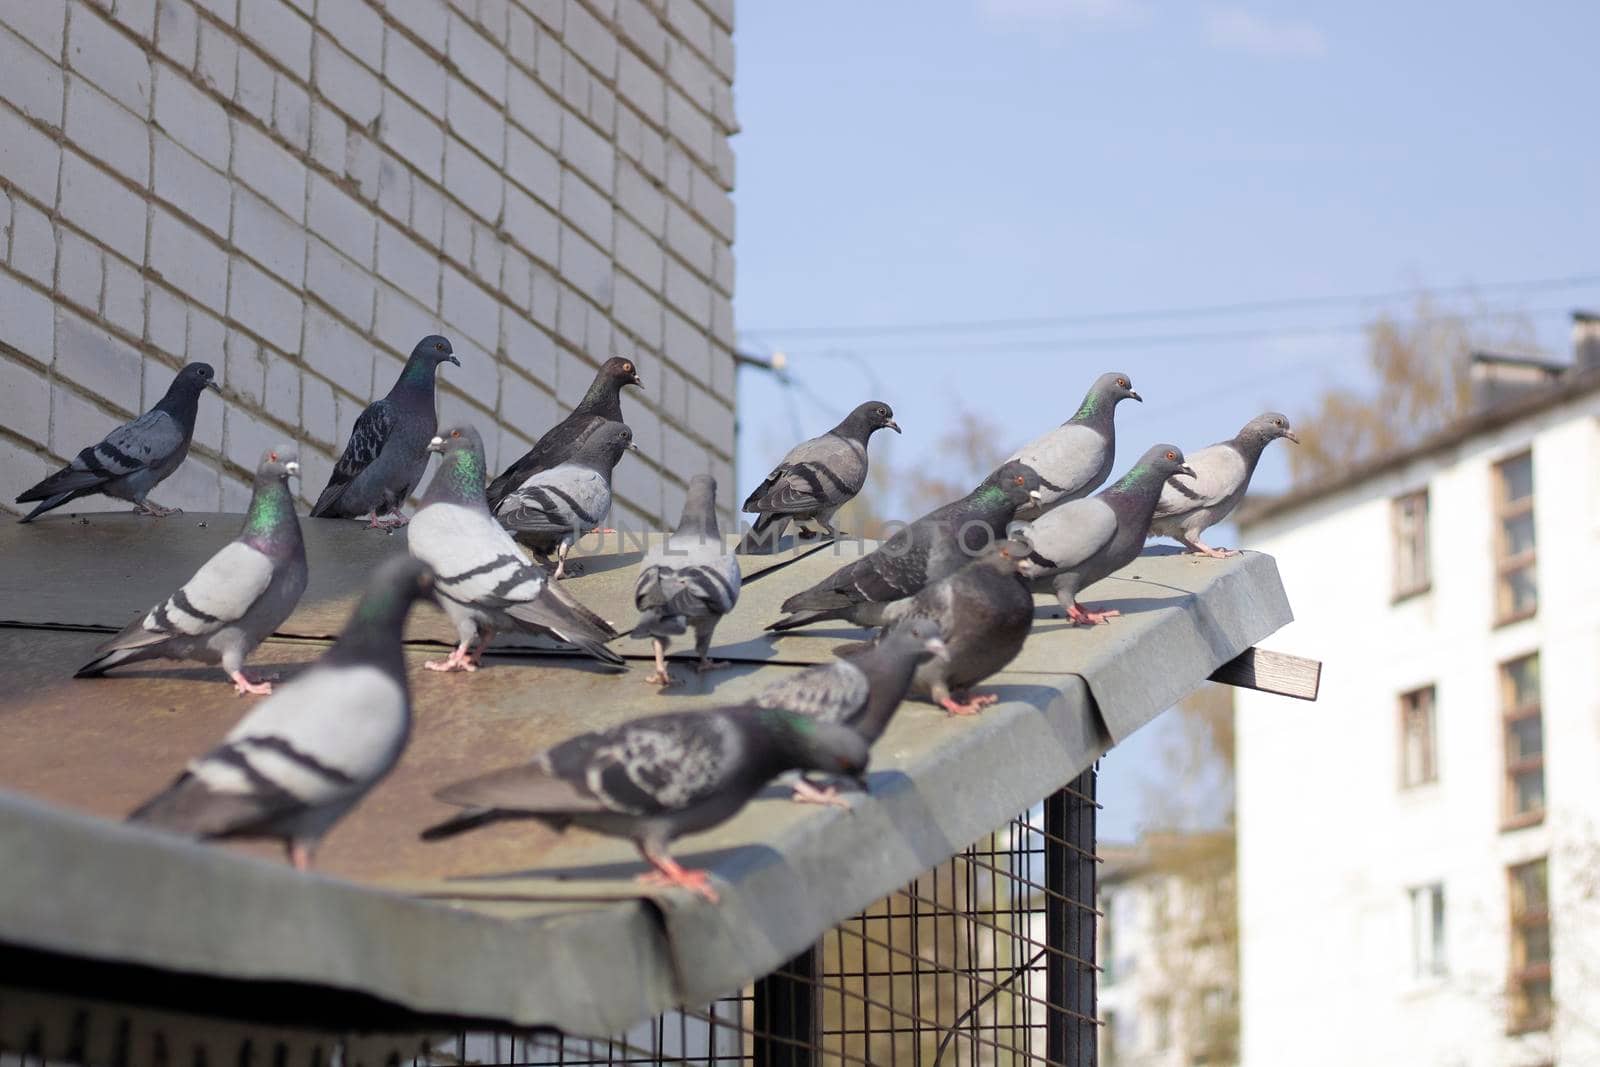 Many gray pigeons sit on the roof on the city street. City meeting or election.